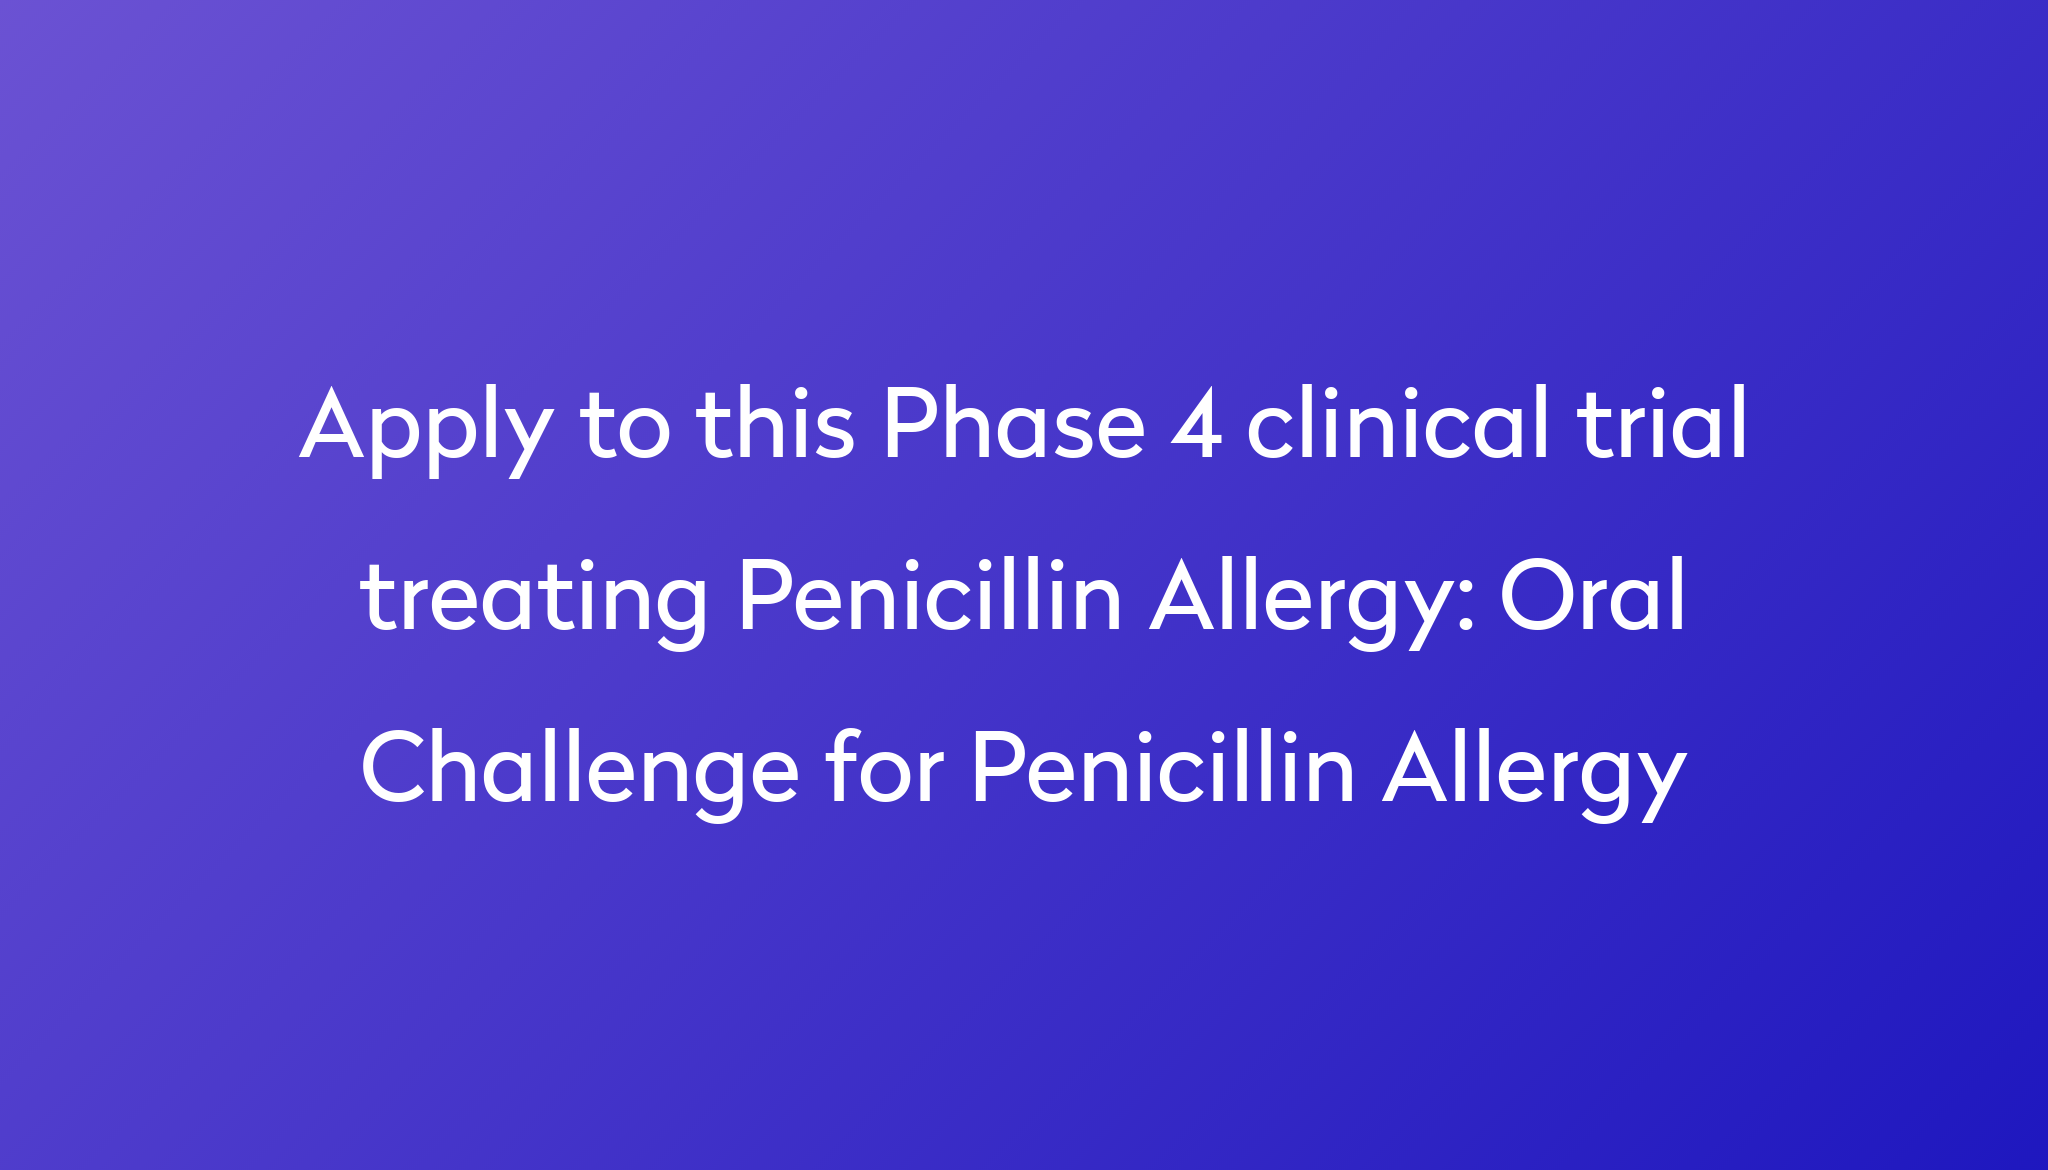 Oral Challenge For Penicillin Allergy Clinical Trial 2023 Power